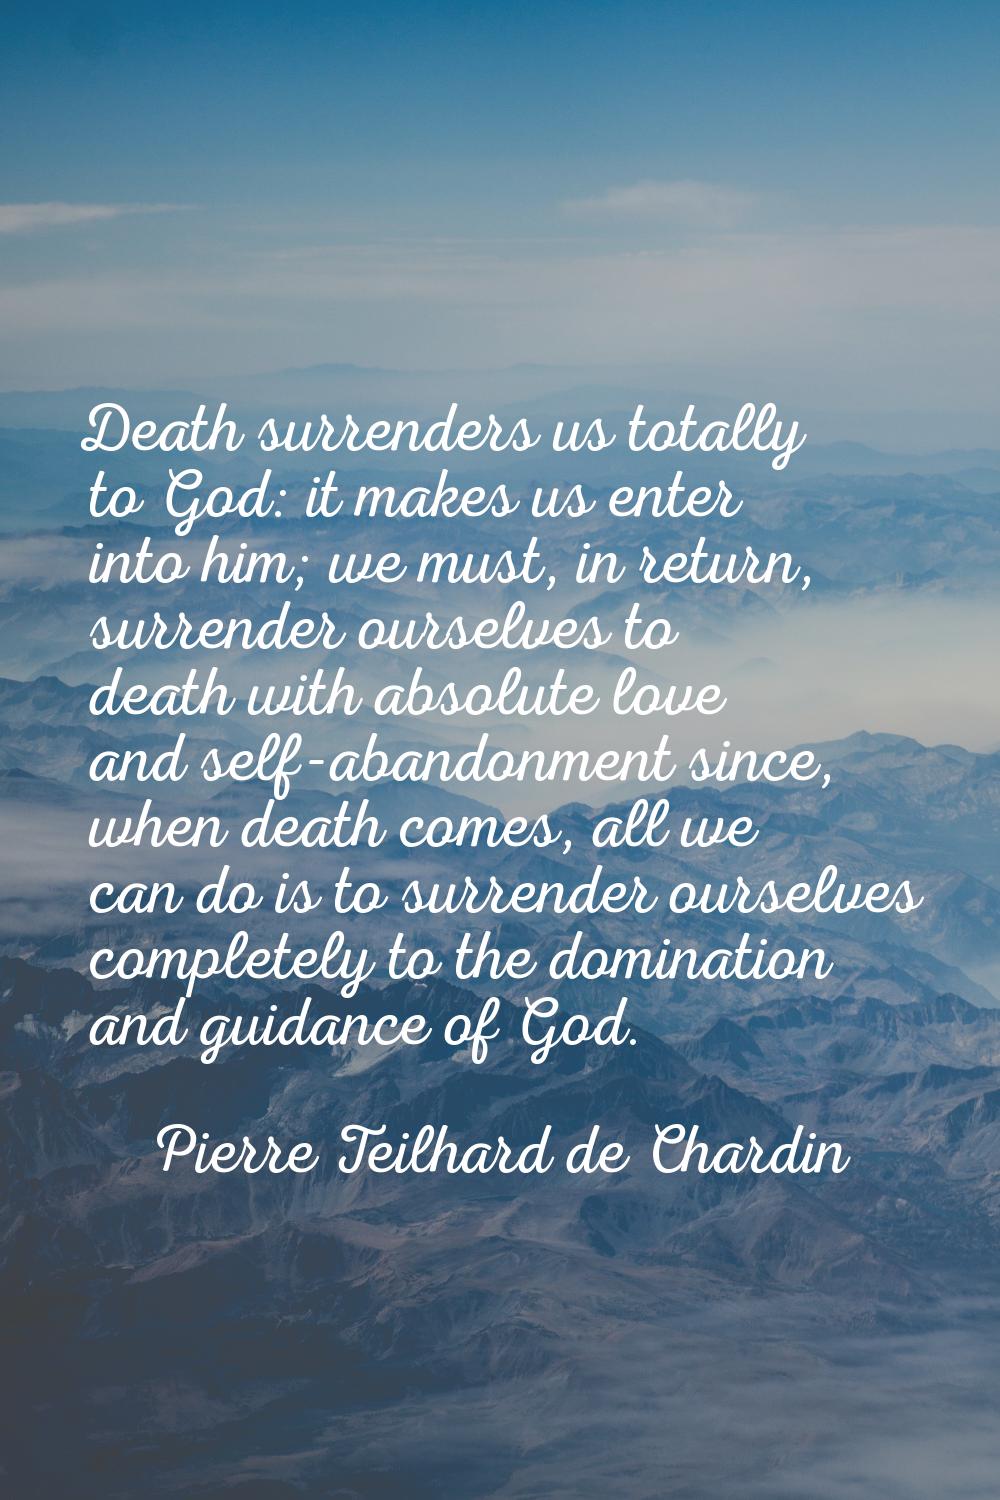 Death surrenders us totally to God: it makes us enter into him; we must, in return, surrender ourse